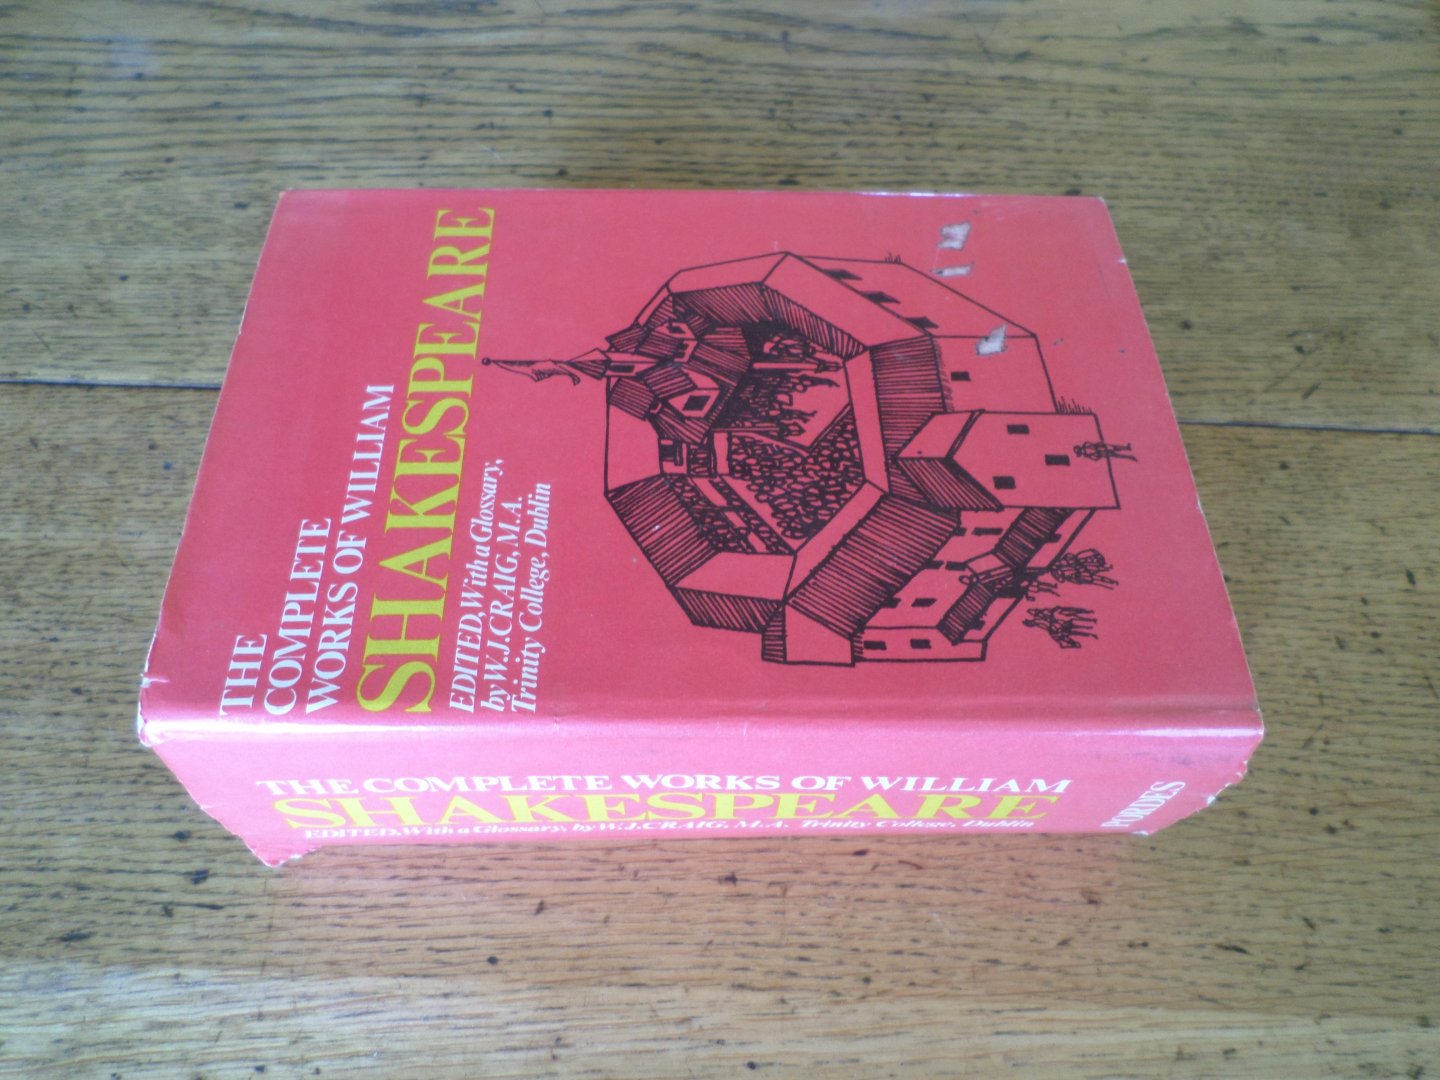 Graig, W.J., M.A. - The complete works of William Shakespeare